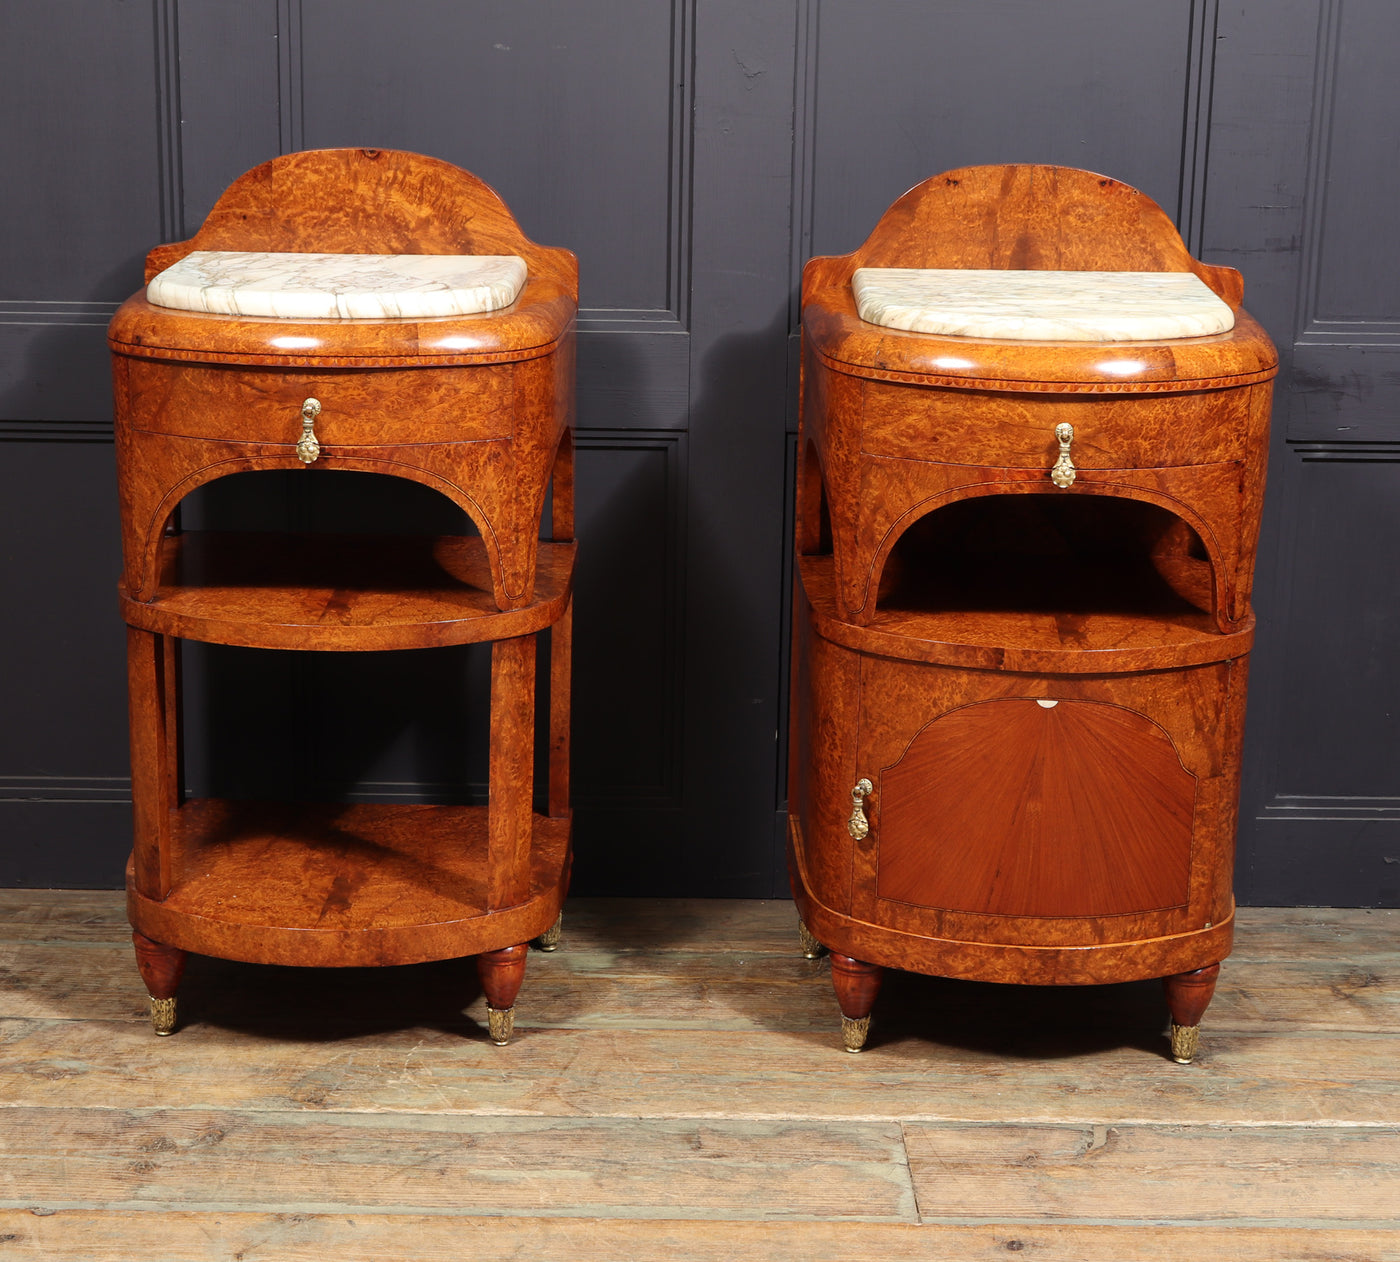 Pair of Art Nouveau Bedside Cabinets in Amboyna c1900